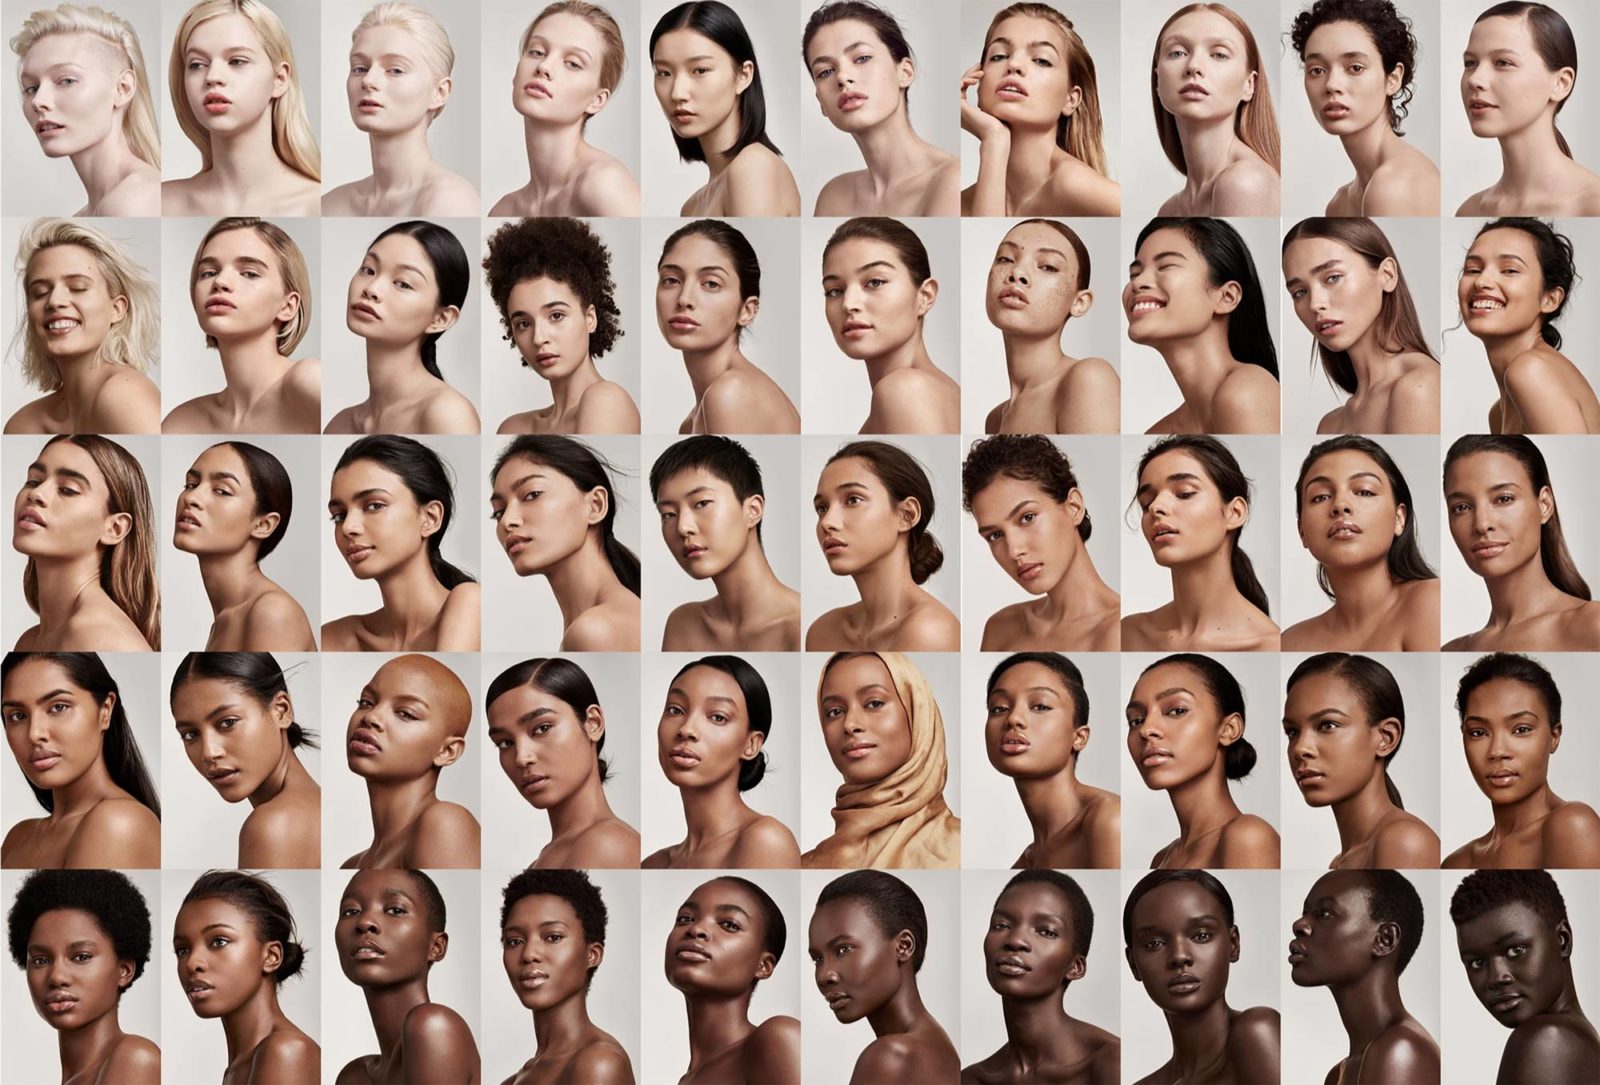 How Fenty Beauty Changed The State Of Play In The Beauty Industry